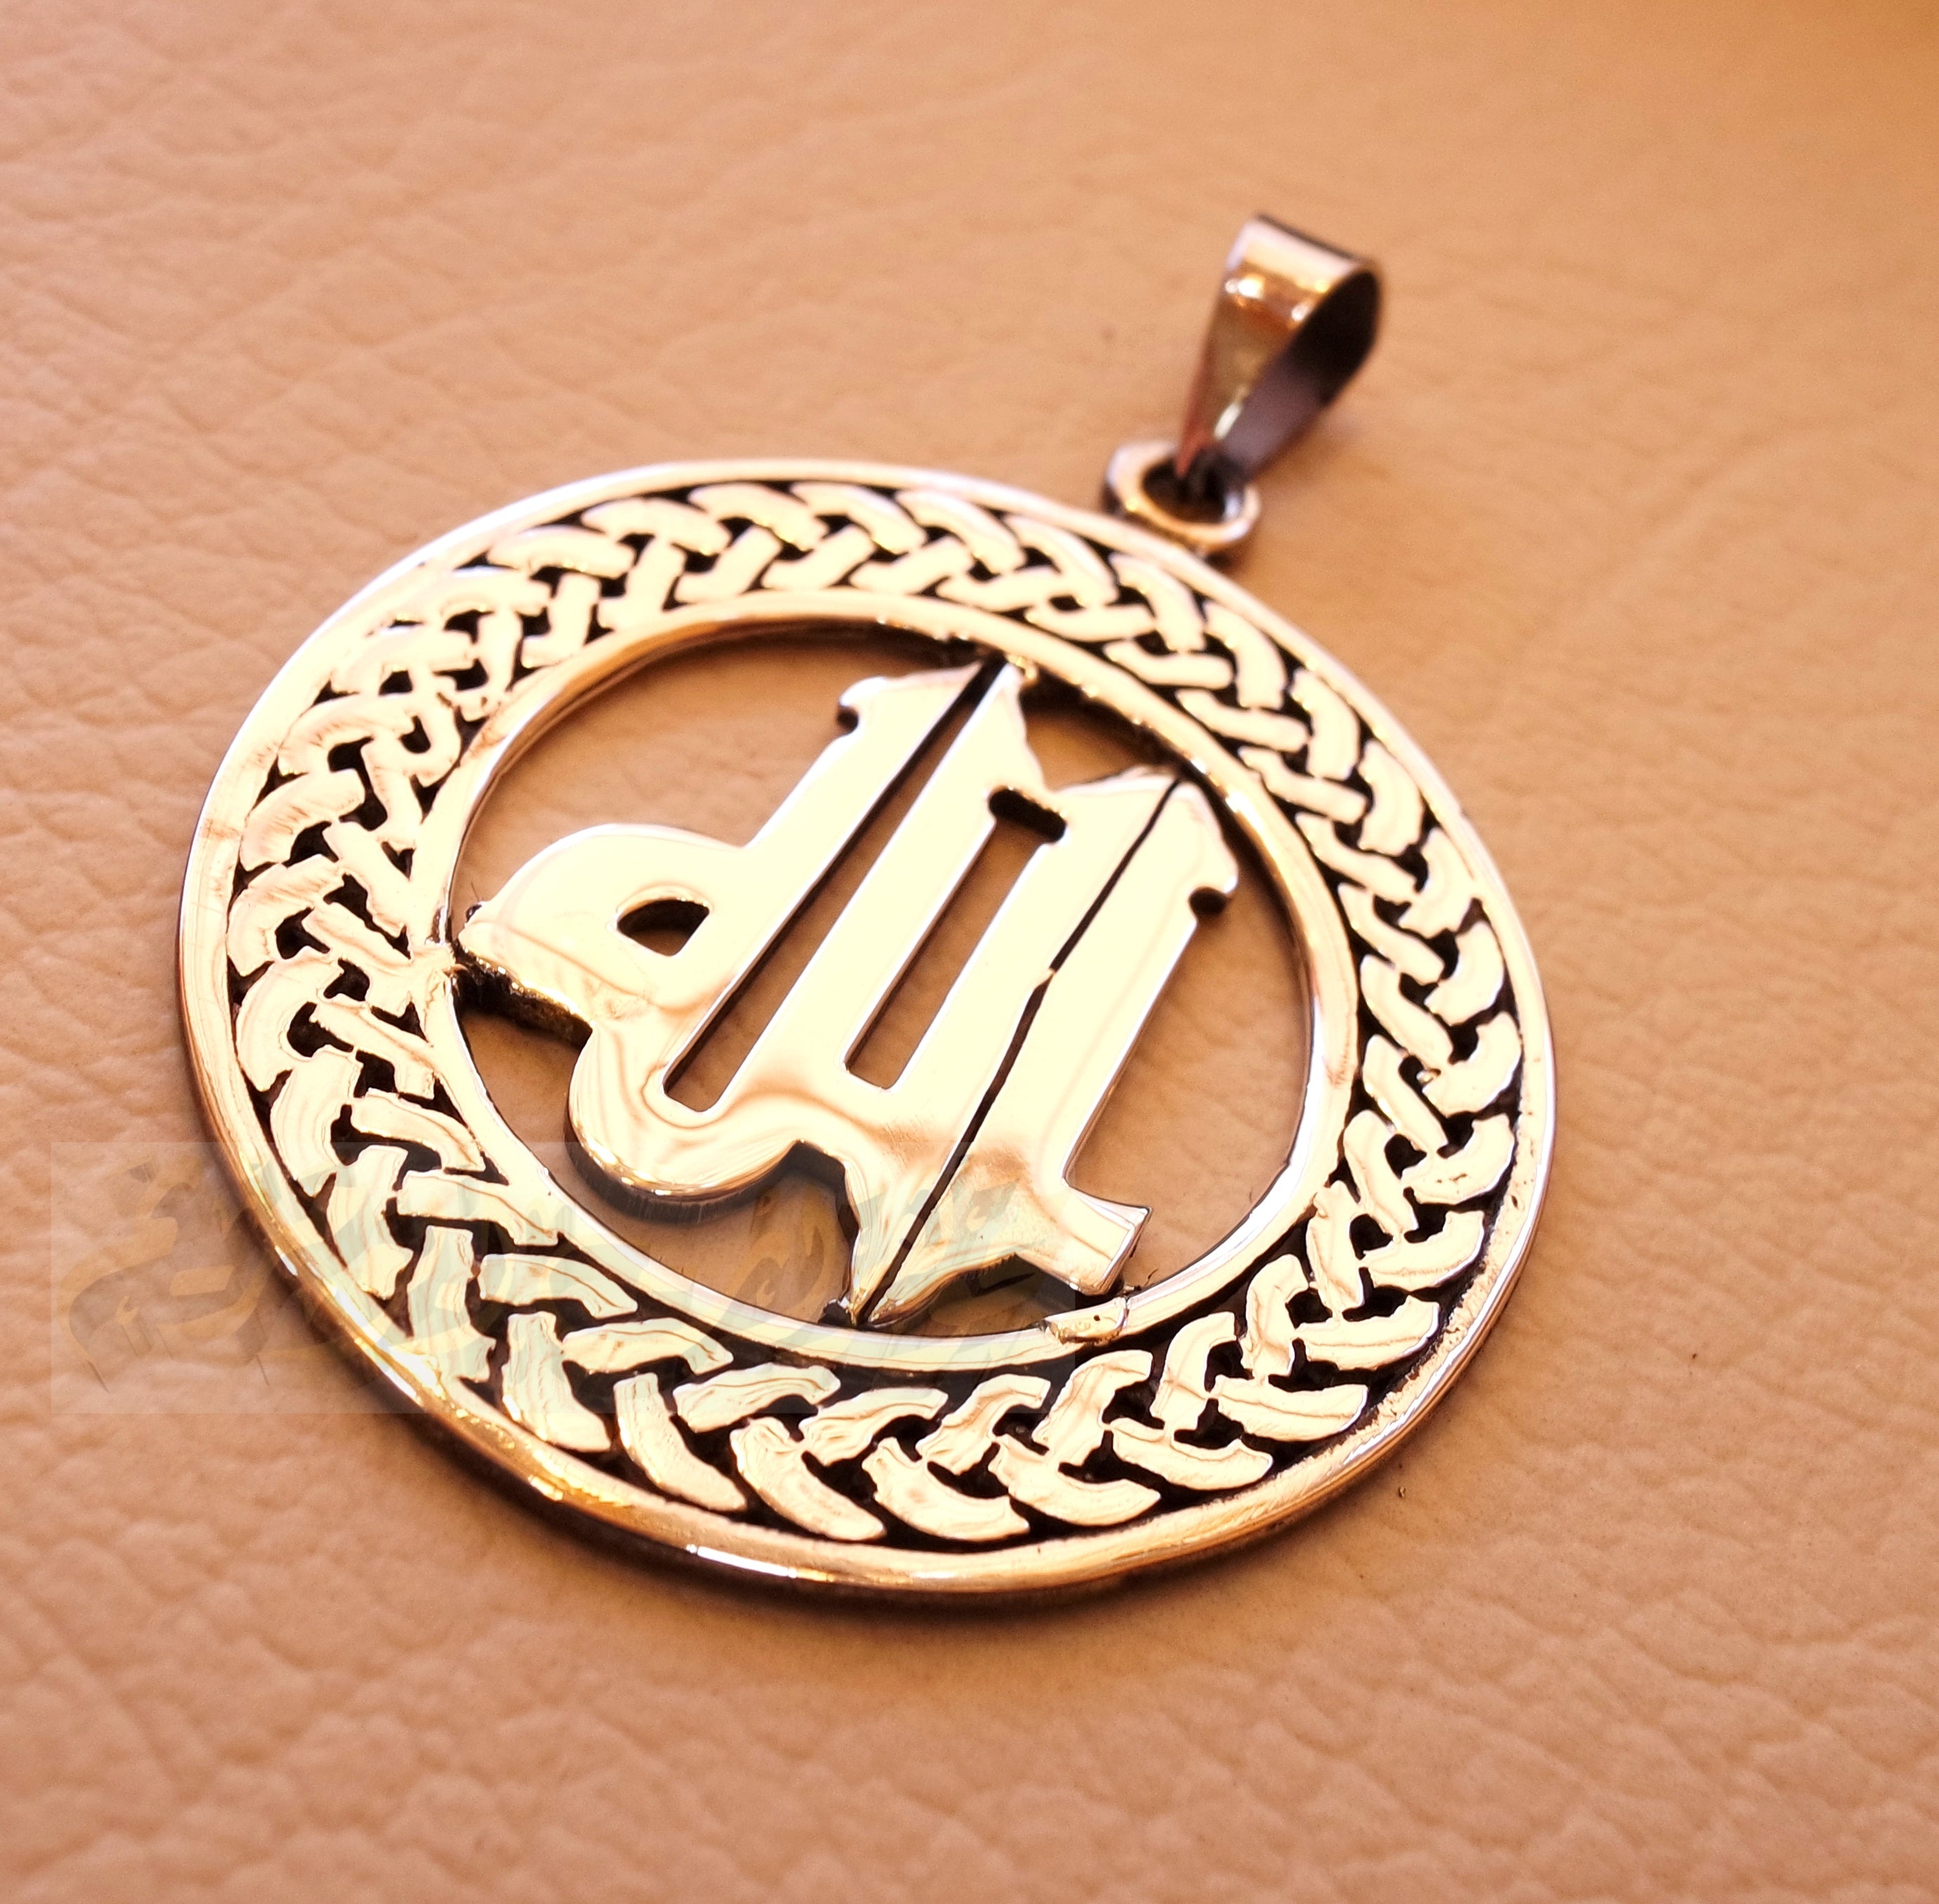 Round Allah pendant with thick chain sterling silver 925 jewelry Islam vintage handmade heavy express shipping muslim religion